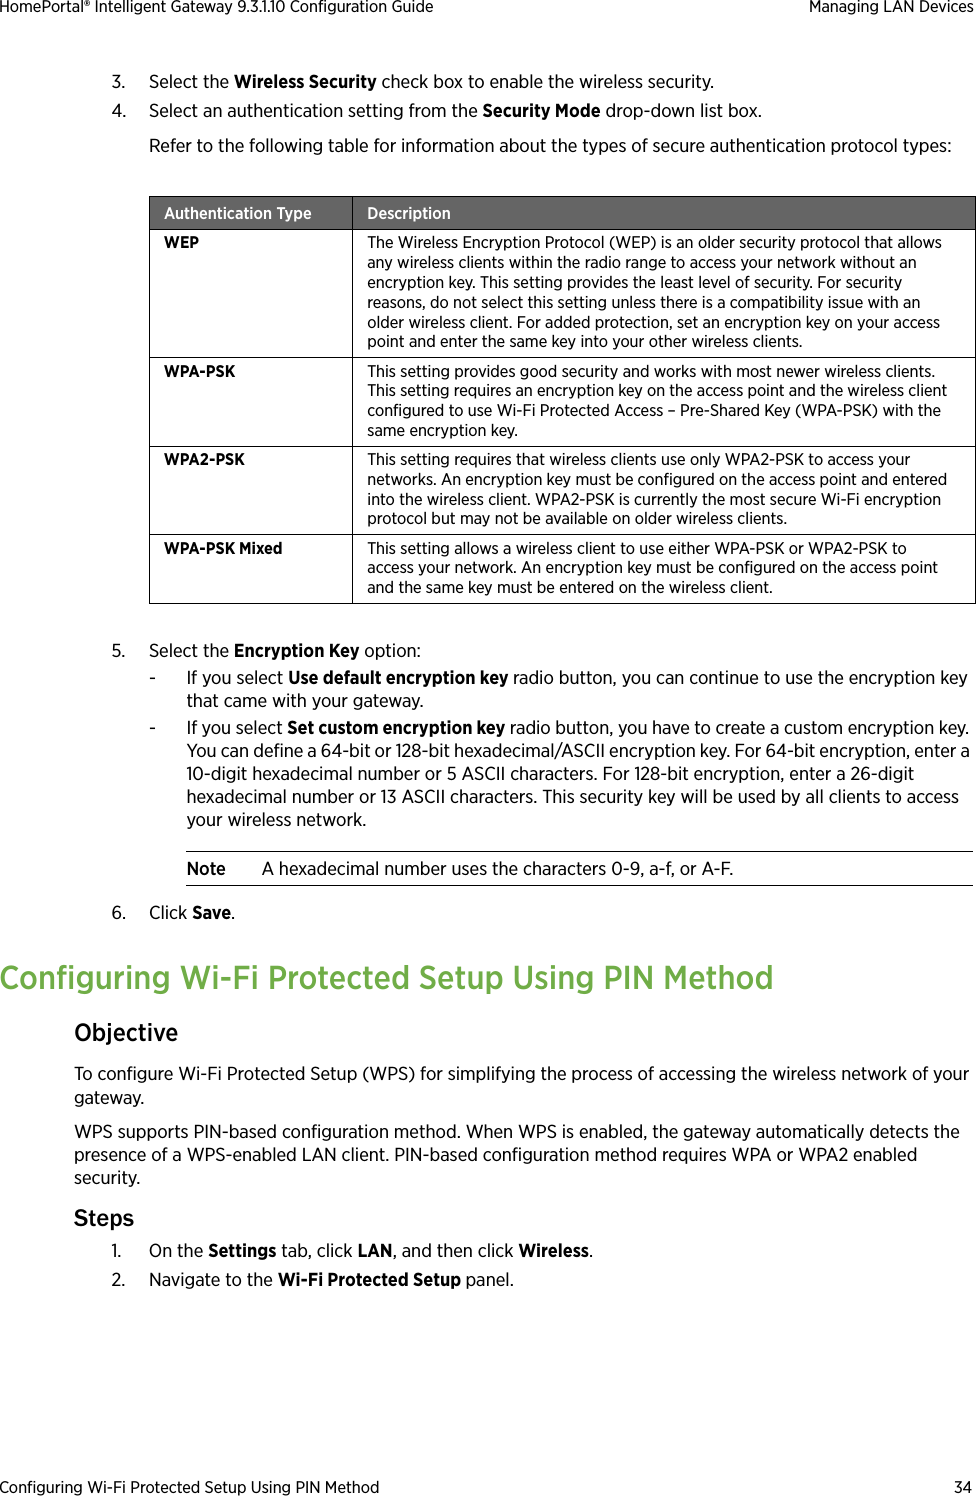 Configuring Wi-Fi Protected Setup Using PIN Method 34HomePortal® Intelligent Gateway 9.3.1.10 Configuration Guide Managing LAN Devices3. Select the Wireless Security check box to enable the wireless security.4. Select an authentication setting from the Security Mode drop-down list box. Refer to the following table for information about the types of secure authentication protocol types:5. Select the Encryption Key option:- If you select Use default encryption key radio button, you can continue to use the encryption key that came with your gateway.- If you select Set custom encryption key radio button, you have to create a custom encryption key. You can define a 64-bit or 128-bit hexadecimal/ASCII encryption key. For 64-bit encryption, enter a 10-digit hexadecimal number or 5 ASCII characters. For 128-bit encryption, enter a 26-digit hexadecimal number or 13 ASCII characters. This security key will be used by all clients to access your wireless network.Note A hexadecimal number uses the characters 0-9, a-f, or A-F.6. Click Save. Configuring Wi-Fi Protected Setup Using PIN MethodObjectiveTo configure Wi-Fi Protected Setup (WPS) for simplifying the process of accessing the wireless network of your gateway.WPS supports PIN-based configuration method. When WPS is enabled, the gateway automatically detects the presence of a WPS-enabled LAN client. PIN-based configuration method requires WPA or WPA2 enabled security.Steps1. On the Settings tab, click LAN, and then click Wireless.2. Navigate to the Wi-Fi Protected Setup panel.Authentication Type DescriptionWEP The Wireless Encryption Protocol (WEP) is an older security protocol that allows any wireless clients within the radio range to access your network without an encryption key. This setting provides the least level of security. For security reasons, do not select this setting unless there is a compatibility issue with an older wireless client. For added protection, set an encryption key on your access point and enter the same key into your other wireless clients.WPA-PSK This setting provides good security and works with most newer wireless clients. This setting requires an encryption key on the access point and the wireless client configured to use Wi-Fi Protected Access – Pre-Shared Key (WPA-PSK) with the same encryption key.WPA2-PSK This setting requires that wireless clients use only WPA2-PSK to access your networks. An encryption key must be configured on the access point and entered into the wireless client. WPA2-PSK is currently the most secure Wi-Fi encryption protocol but may not be available on older wireless clients.WPA-PSK Mixed This setting allows a wireless client to use either WPA-PSK or WPA2-PSK to access your network. An encryption key must be configured on the access point and the same key must be entered on the wireless client.